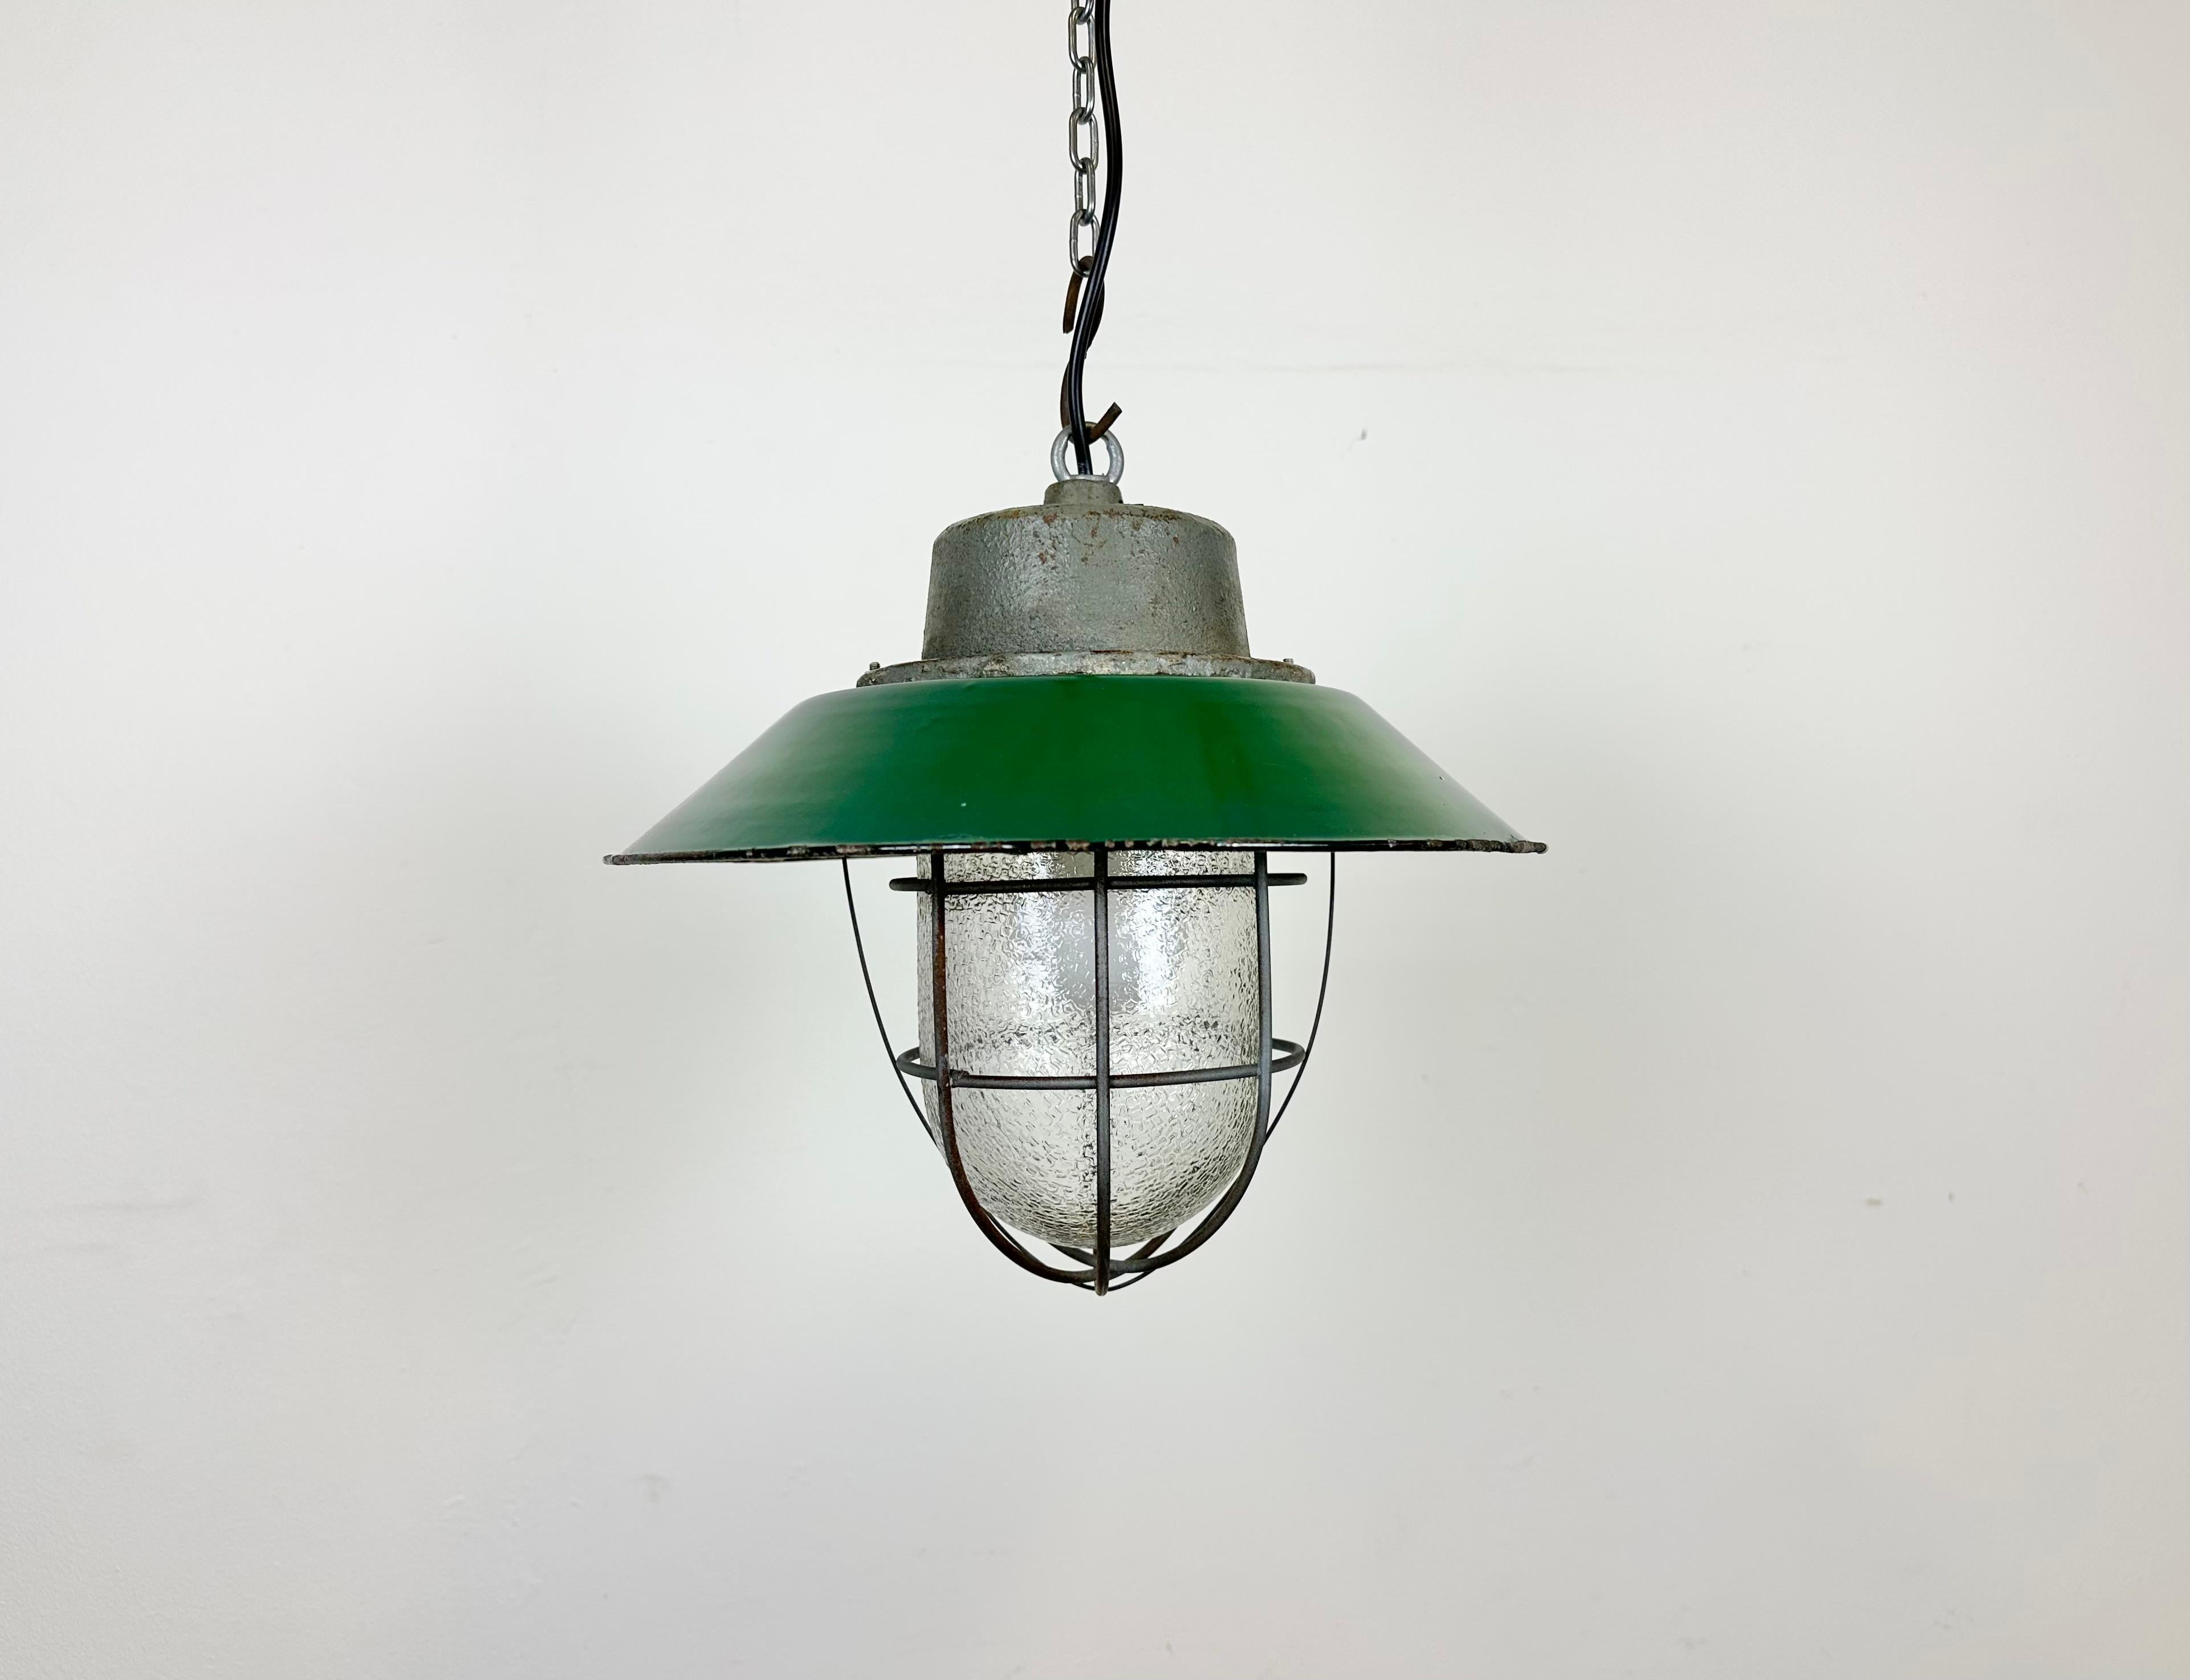 Industrial hanging lamp manufactured in Poland during the 1960s. It features a green enamel shade with white enamel interior, a cast iron top,a frosted glass cover and iron grid. The porcelain socket requires E 27/ E26 lightbulbs .New wire. The